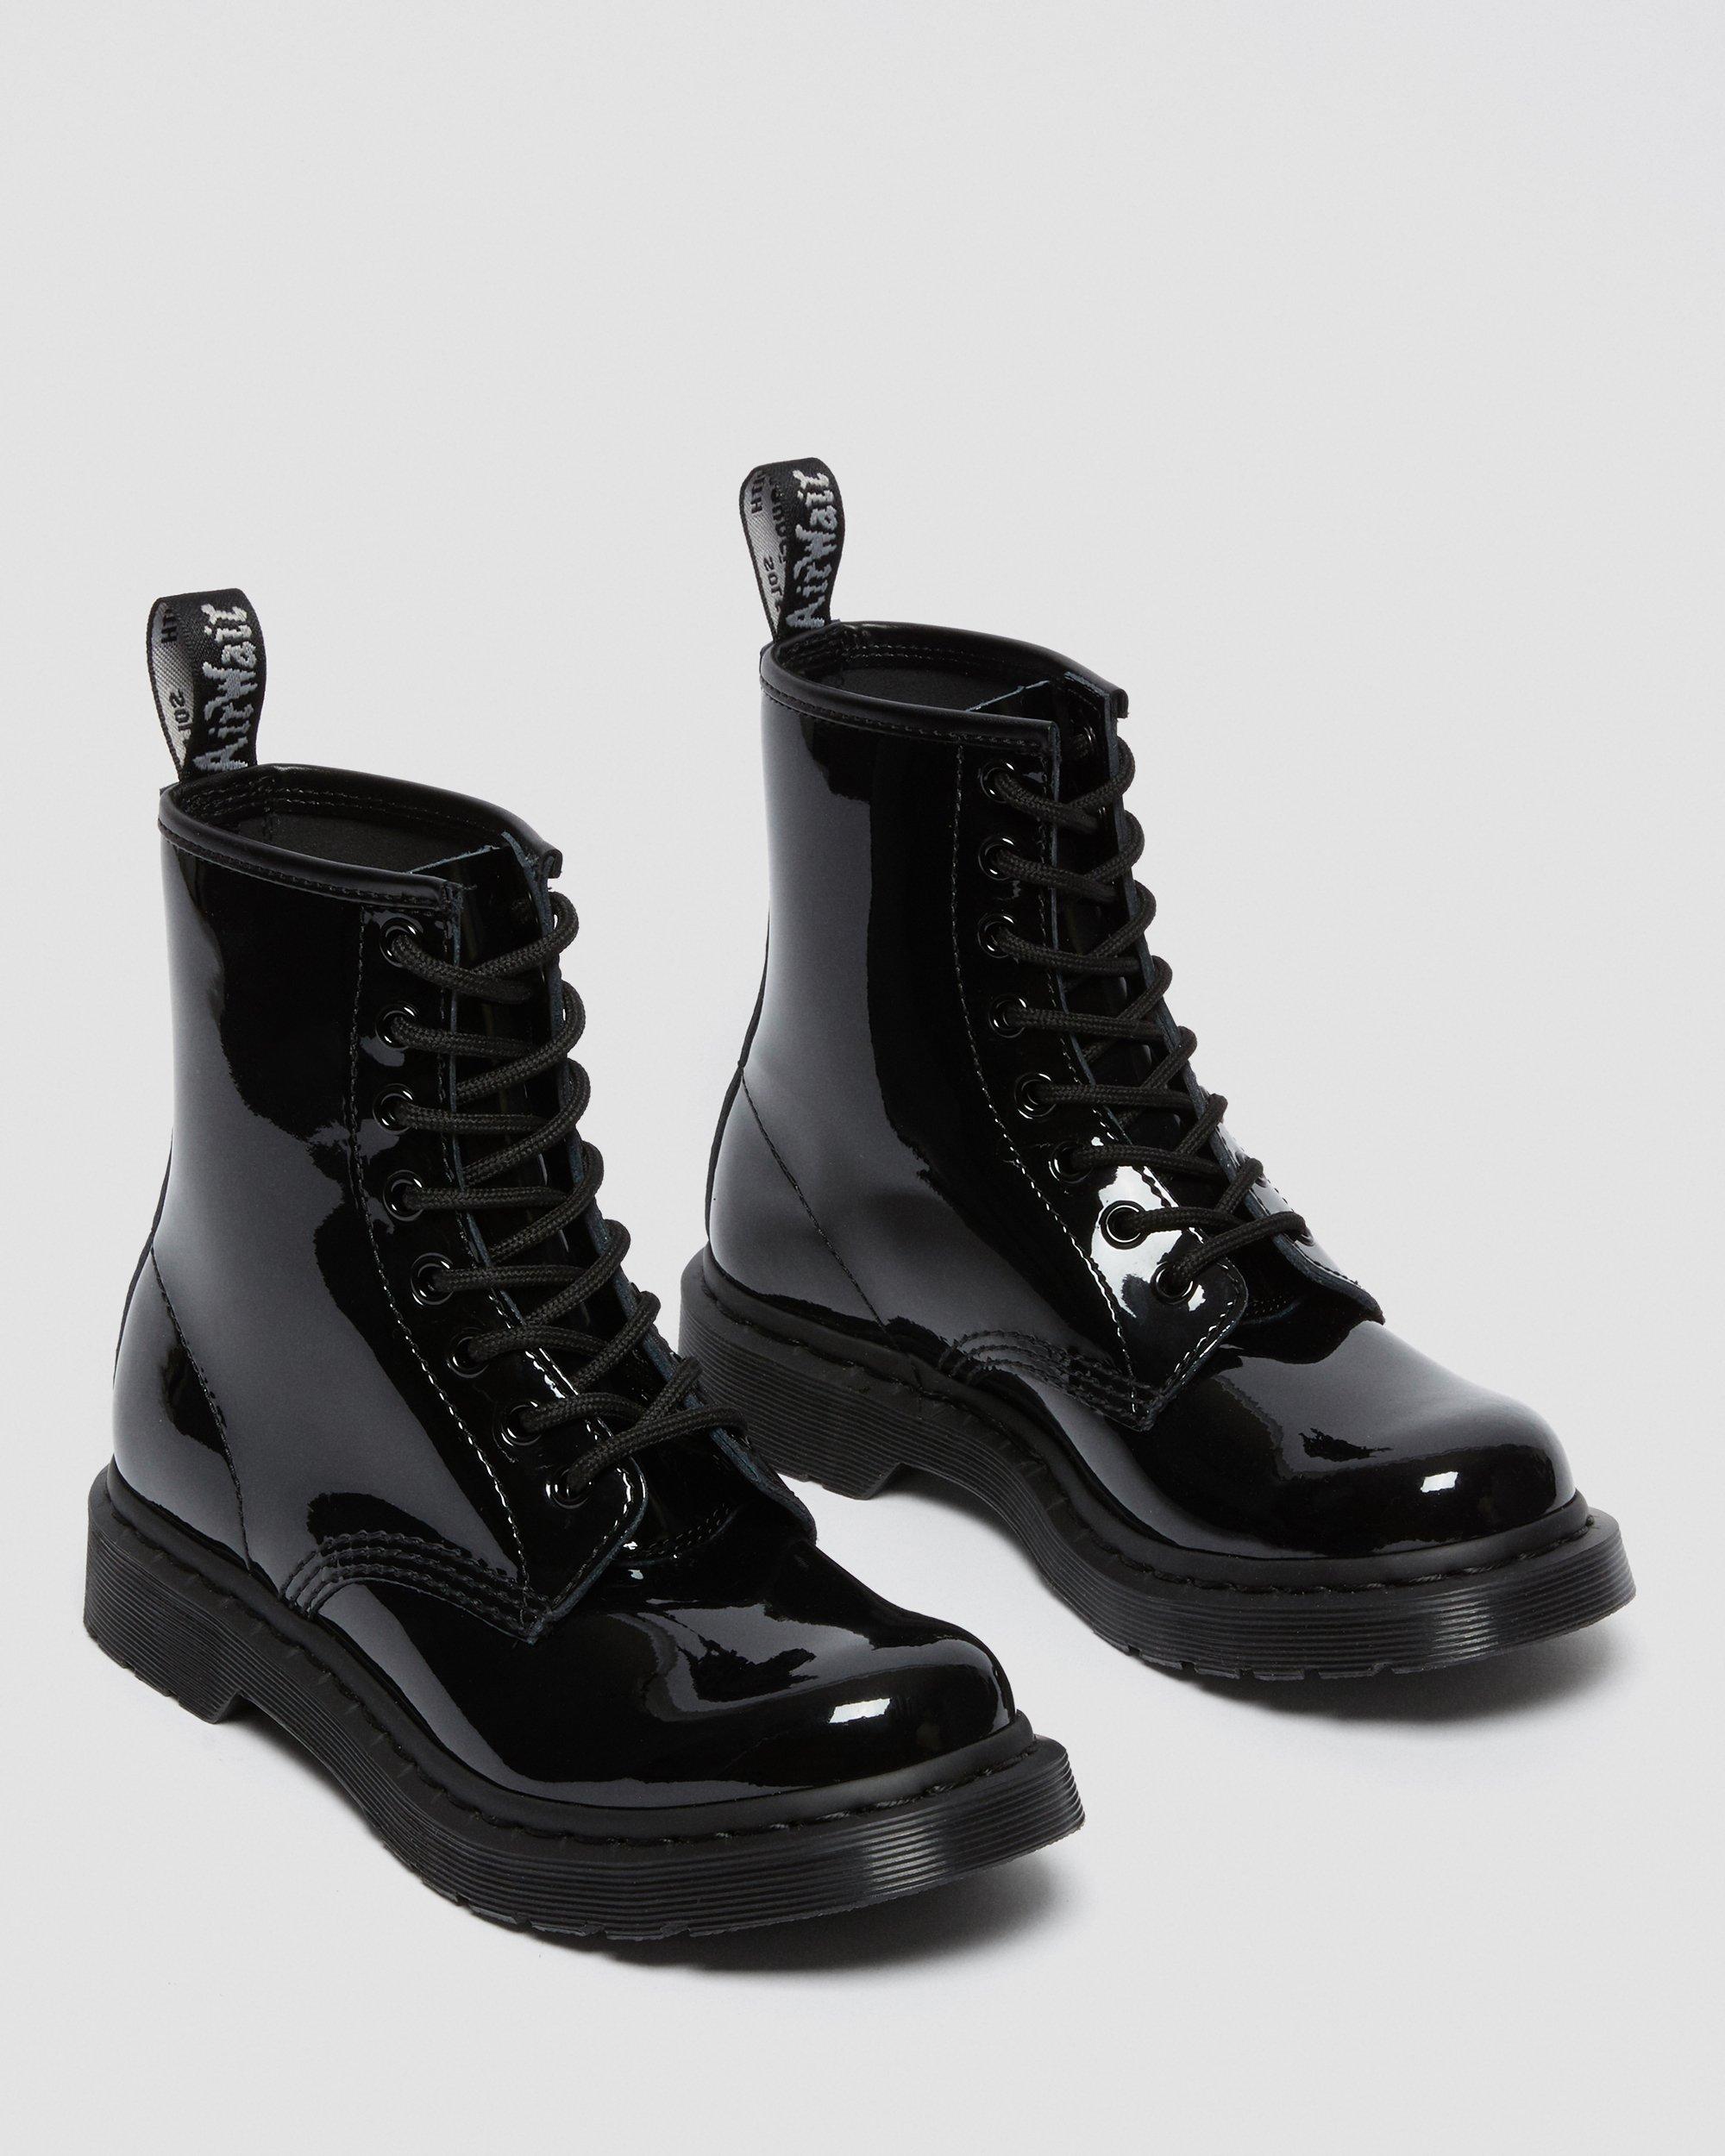 DR MARTENS 1460 Mono Patent Leather Lace Up Boots